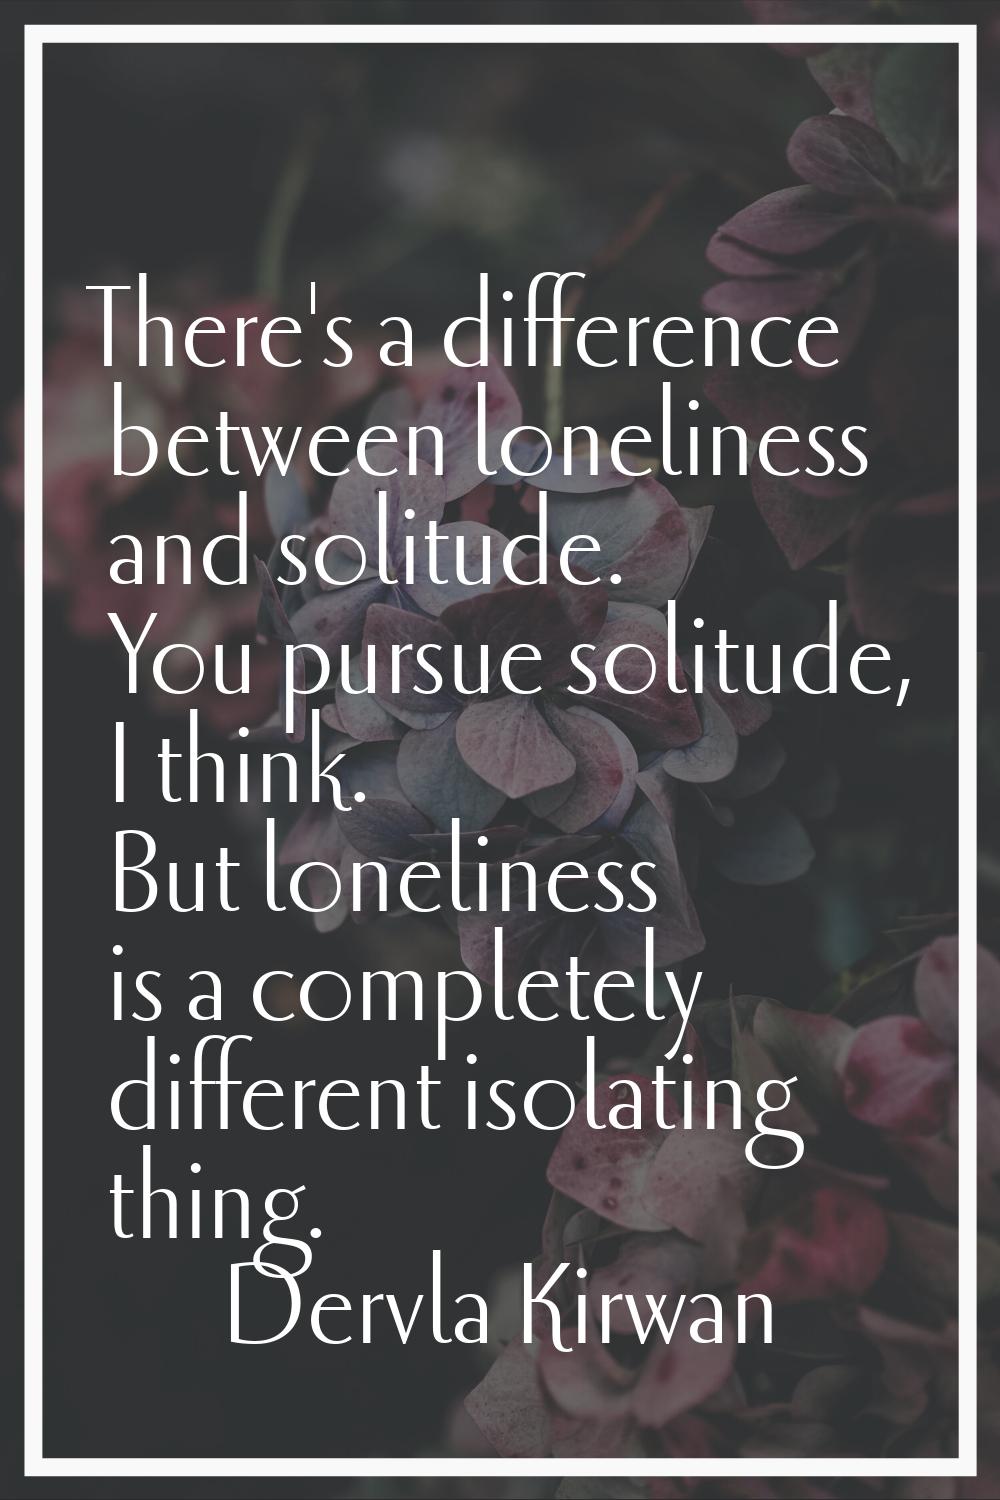 There's a difference between loneliness and solitude. You pursue solitude, I think. But loneliness 